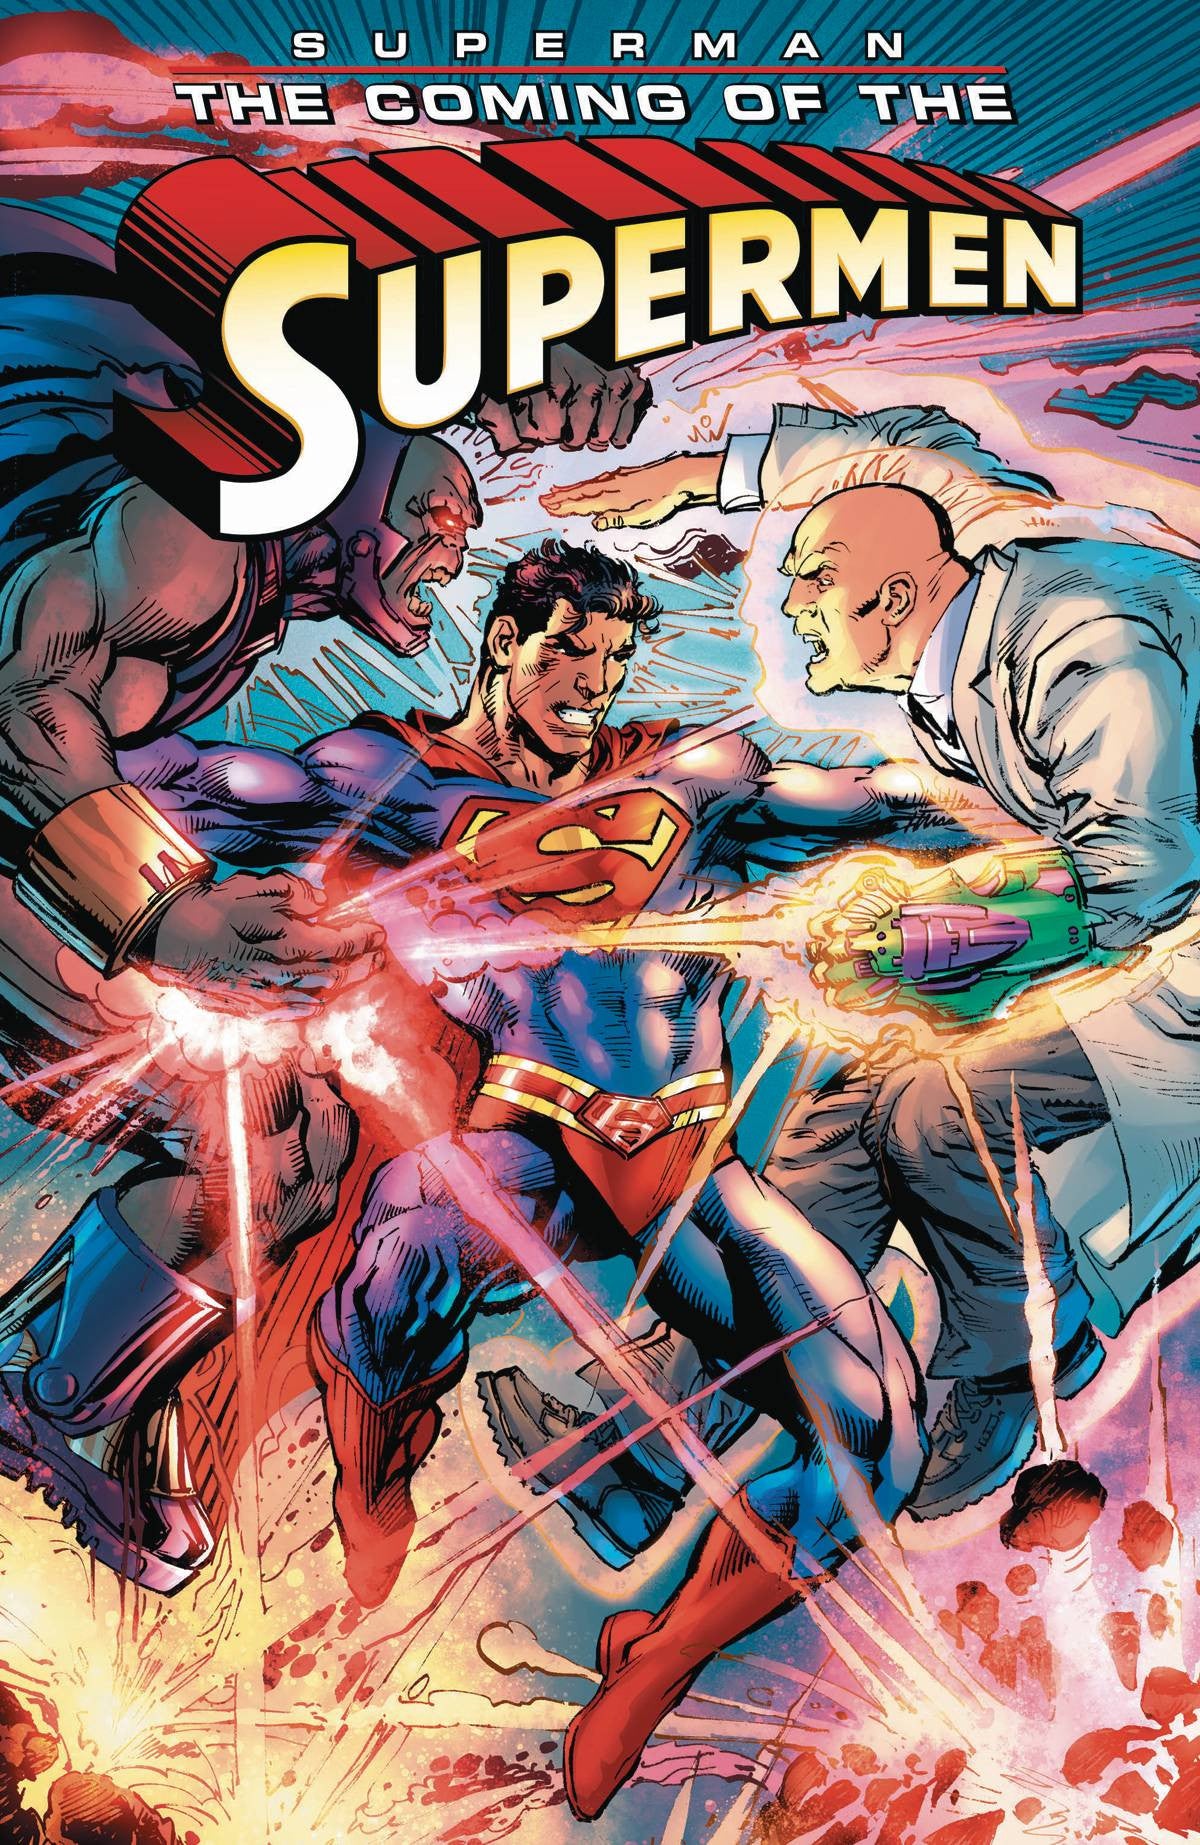 SUPERMAN THE COMING OF THE SUPERMEN #5 (OF 6) COVER